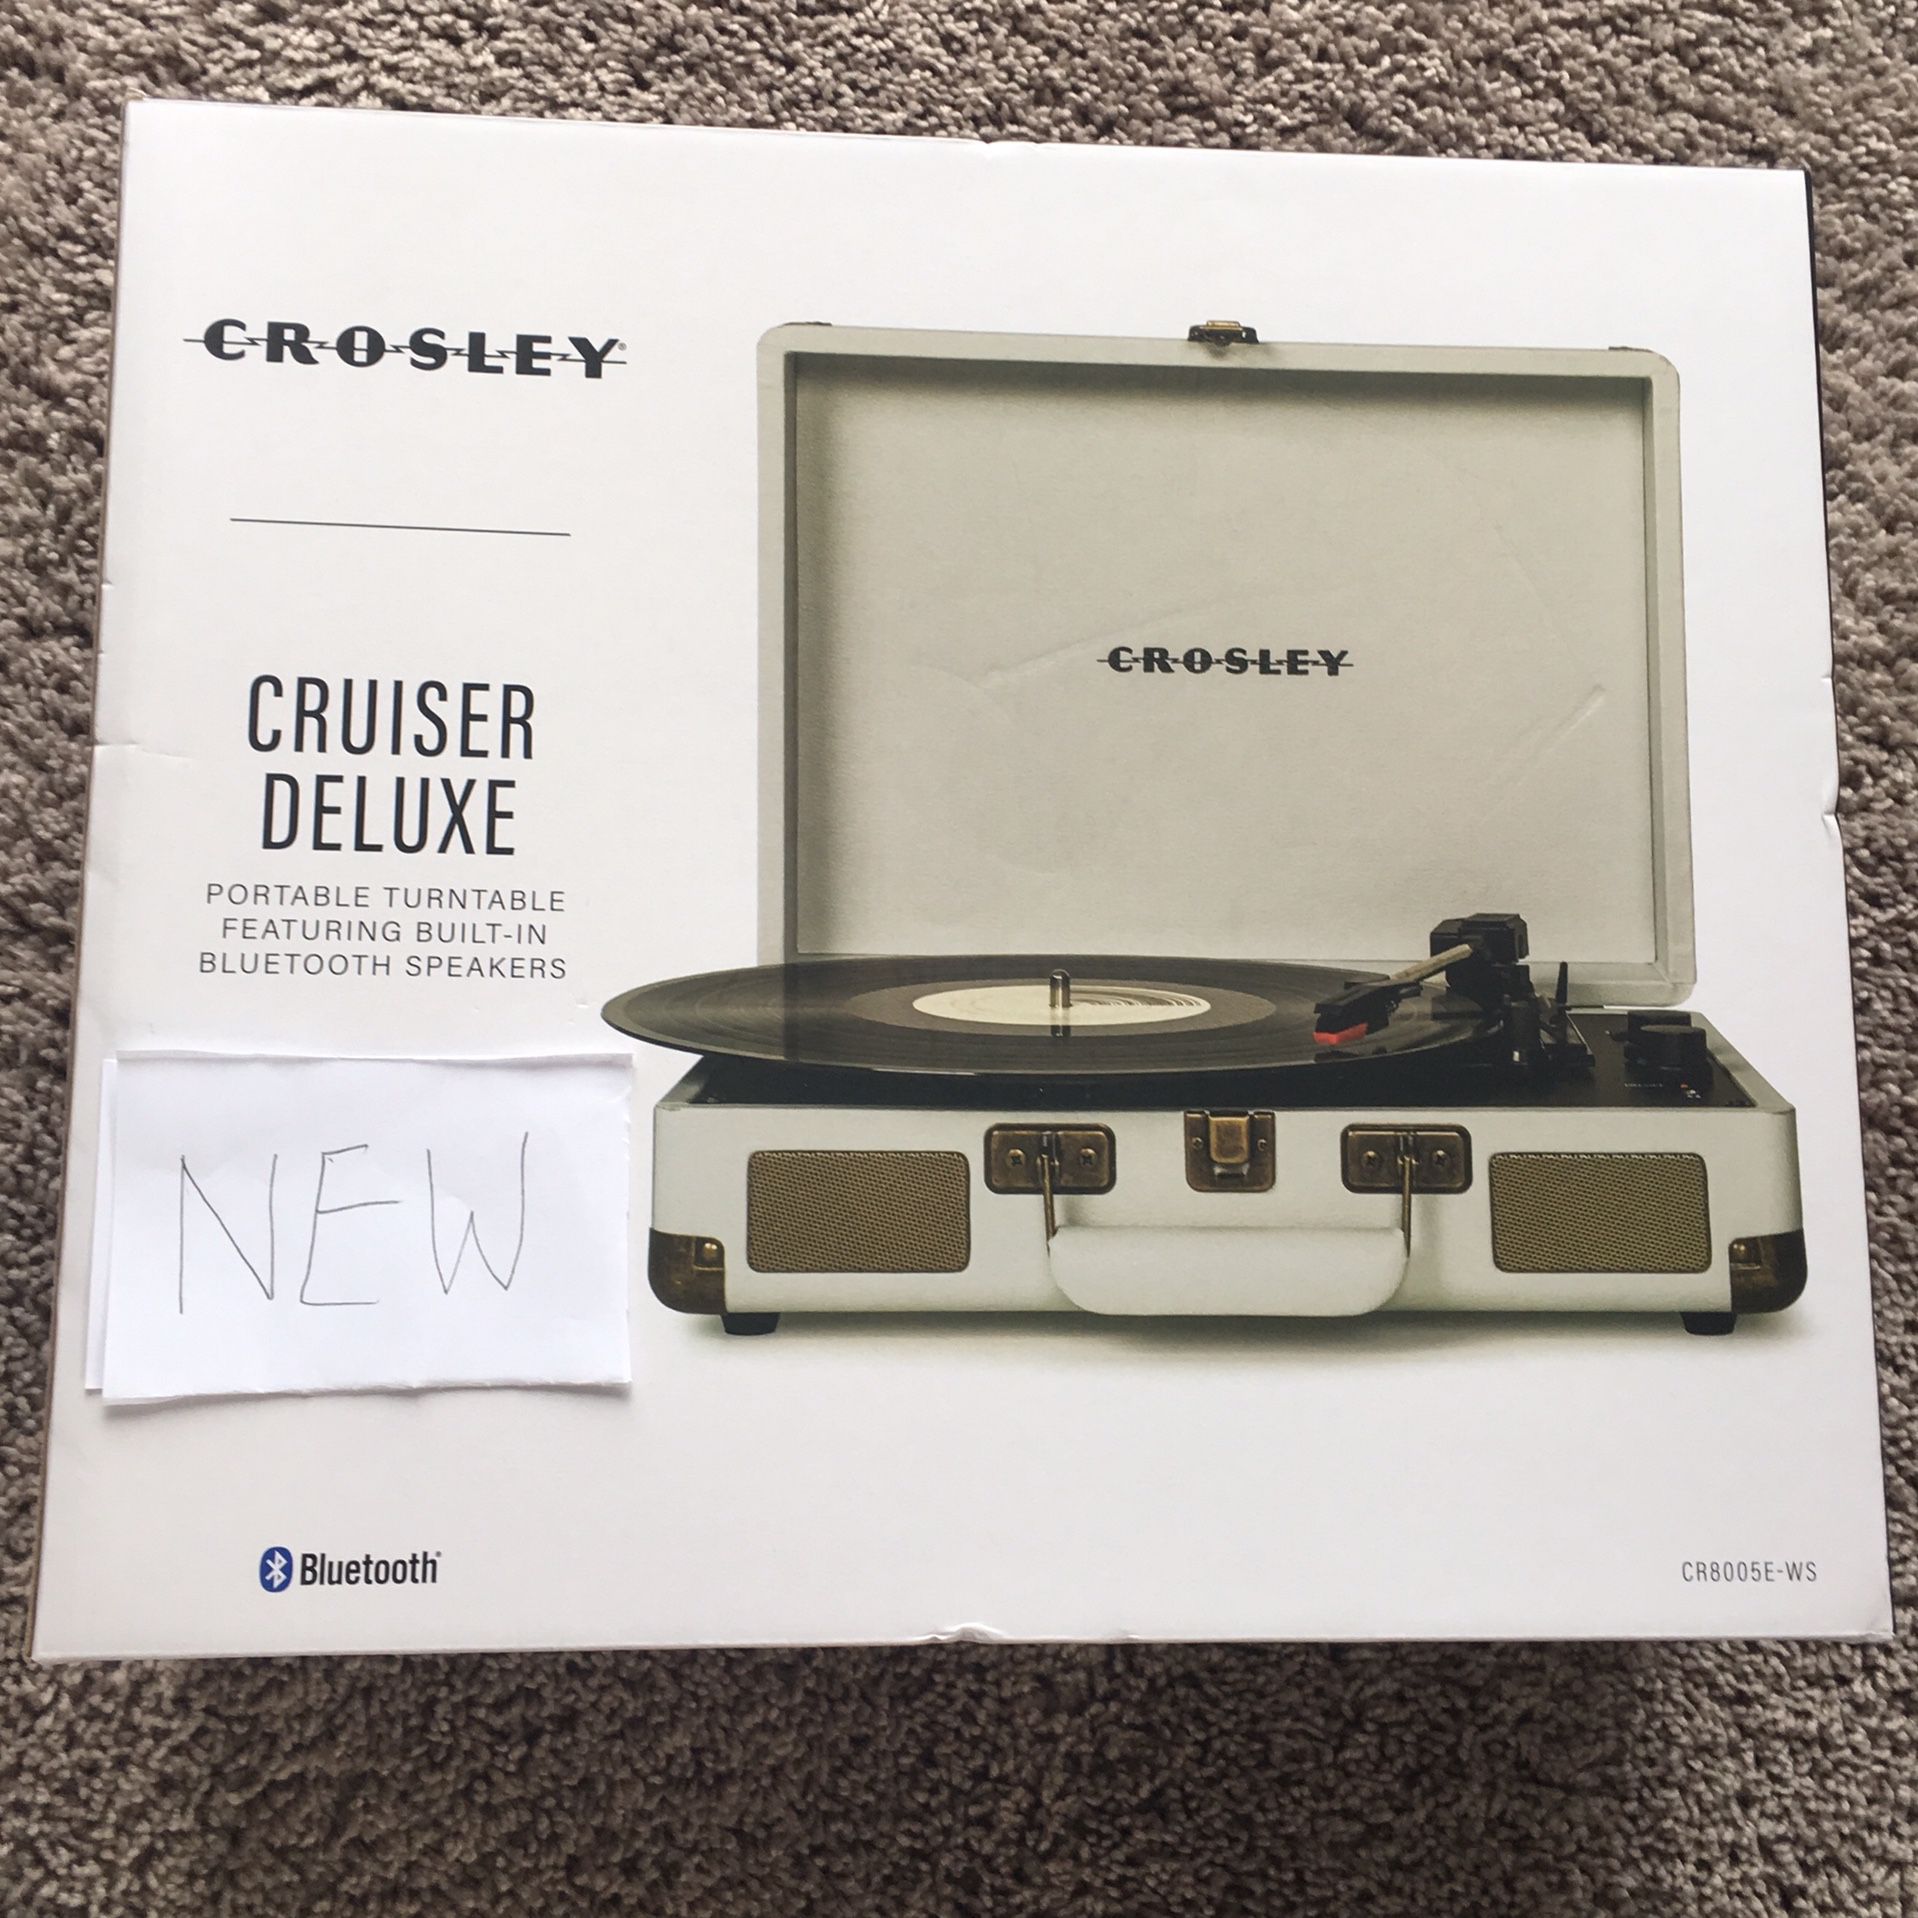 Crosley Cruiser Deluxe Record Player Turntable New Sealed White & Gold Limited Editon